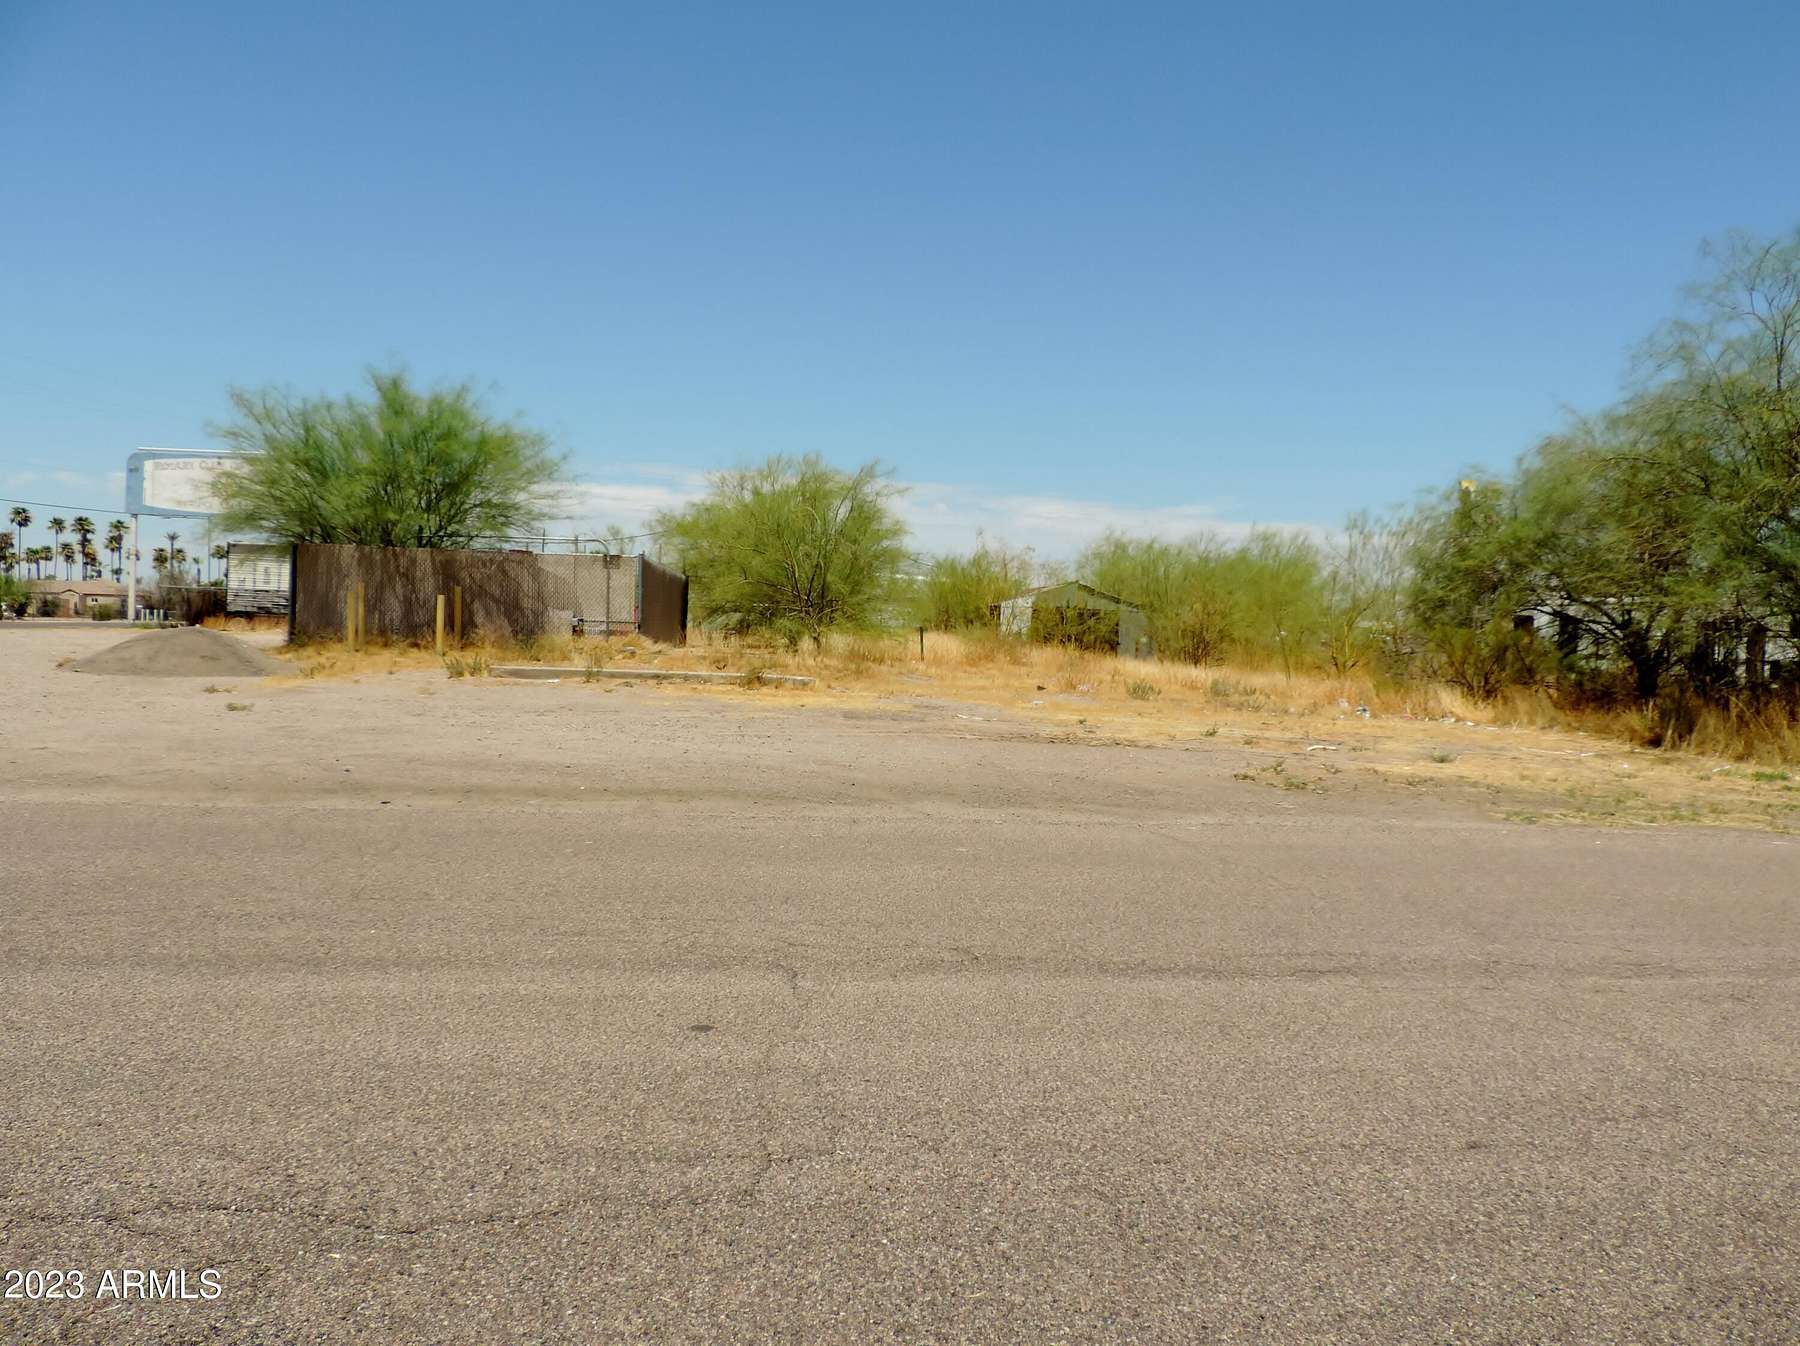 0.45 Acres of Commercial Land for Sale in Coolidge, Arizona